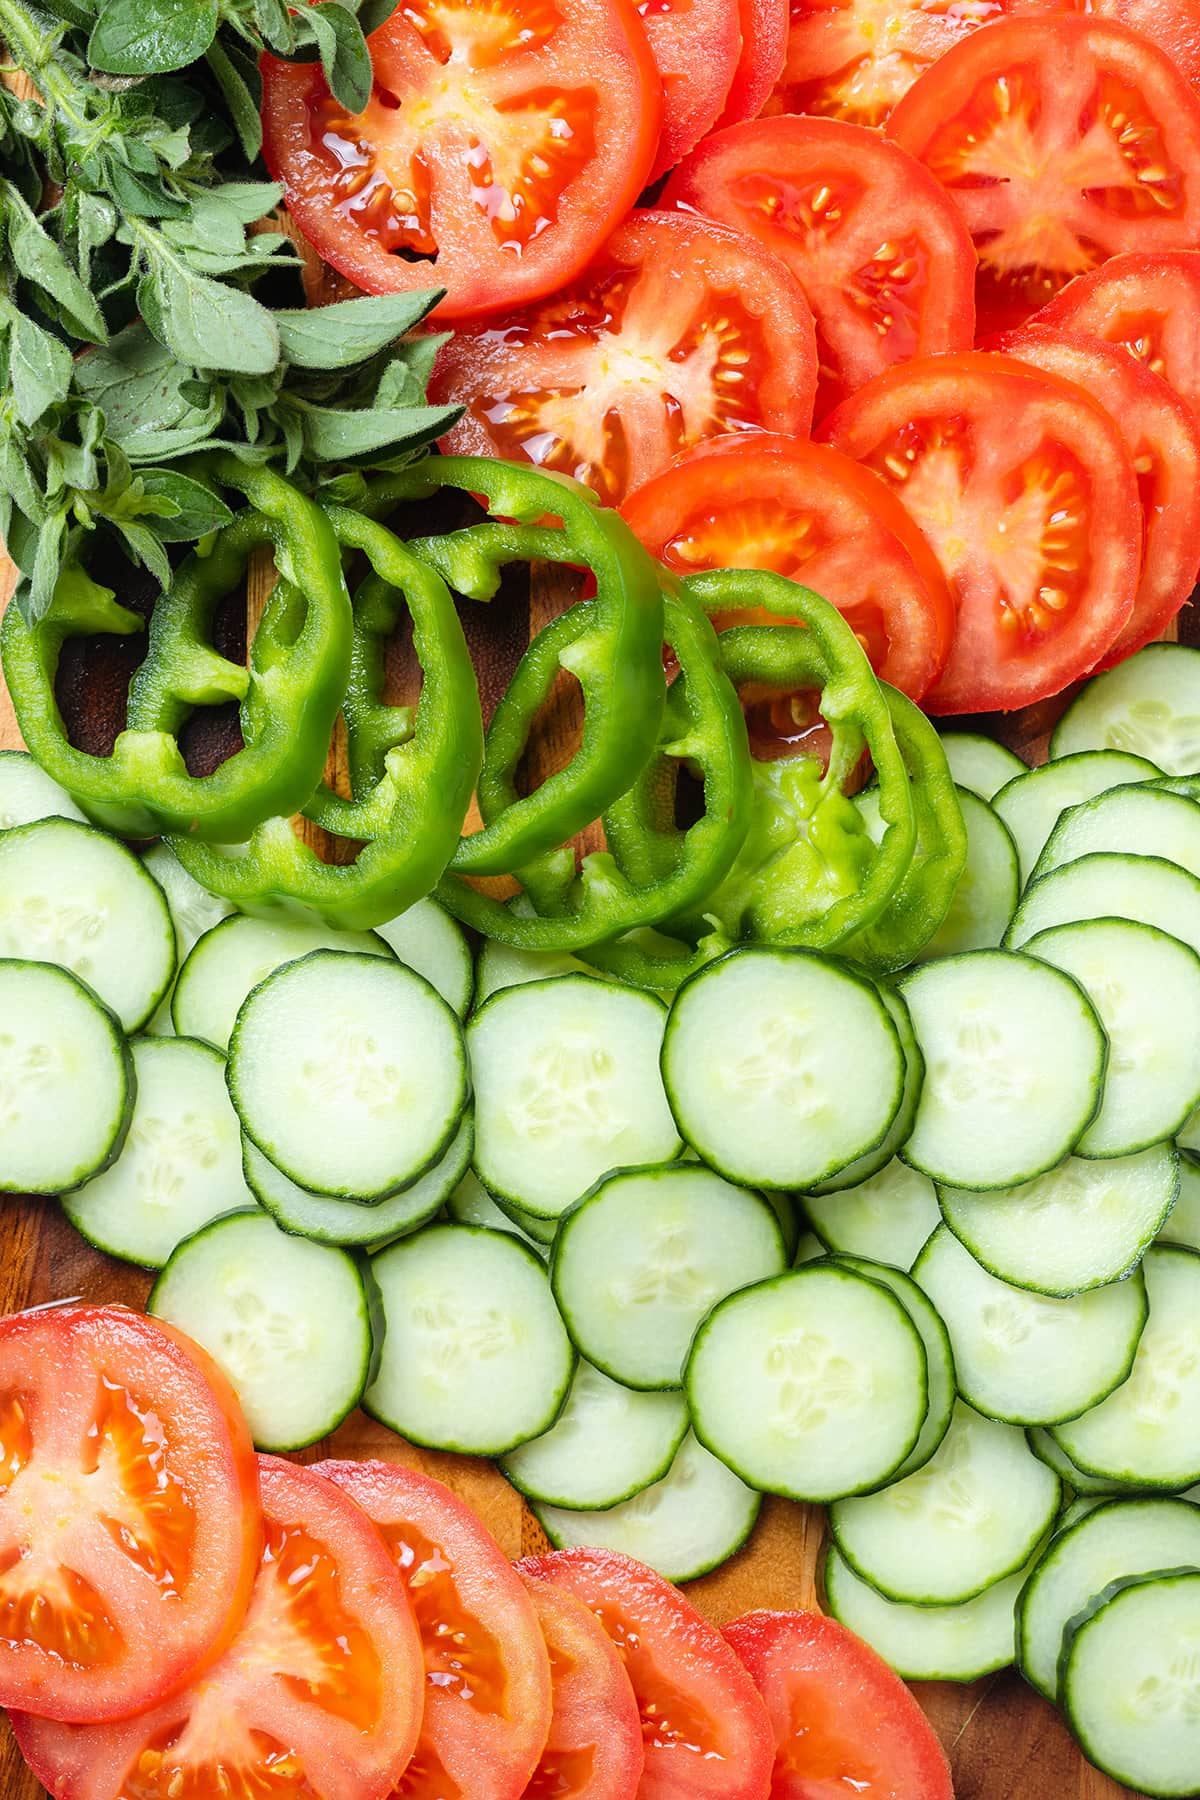 Sliced cucumbers, tomatoes, green bell peppers, and fresh oregano on a wooden cutting board.